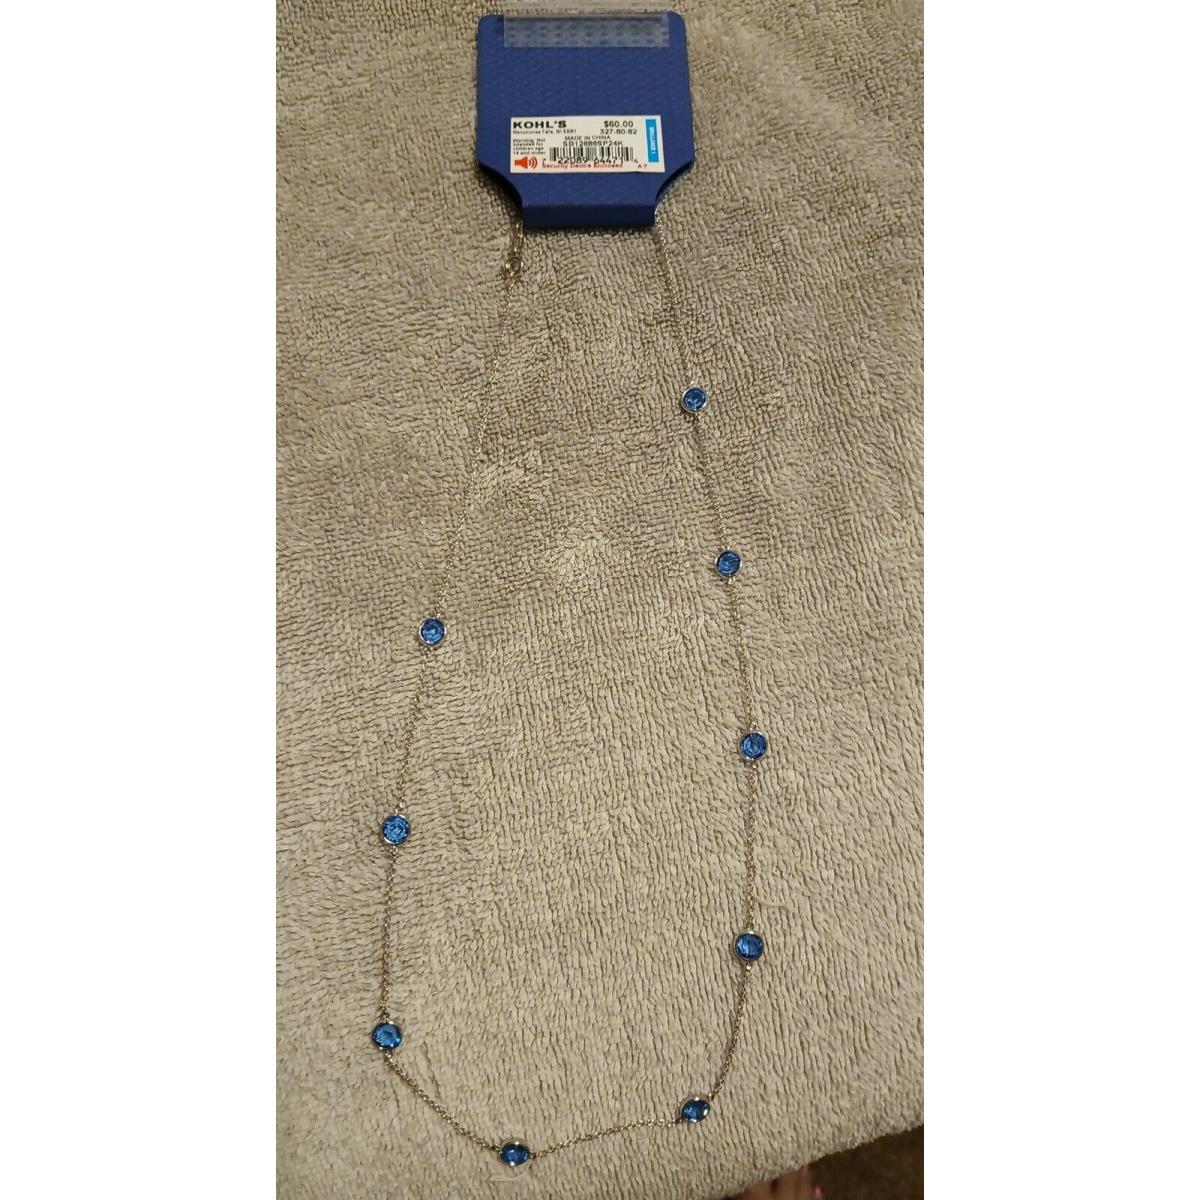 Swarovski Brilliance Blue Chystal Necklace and Earrings